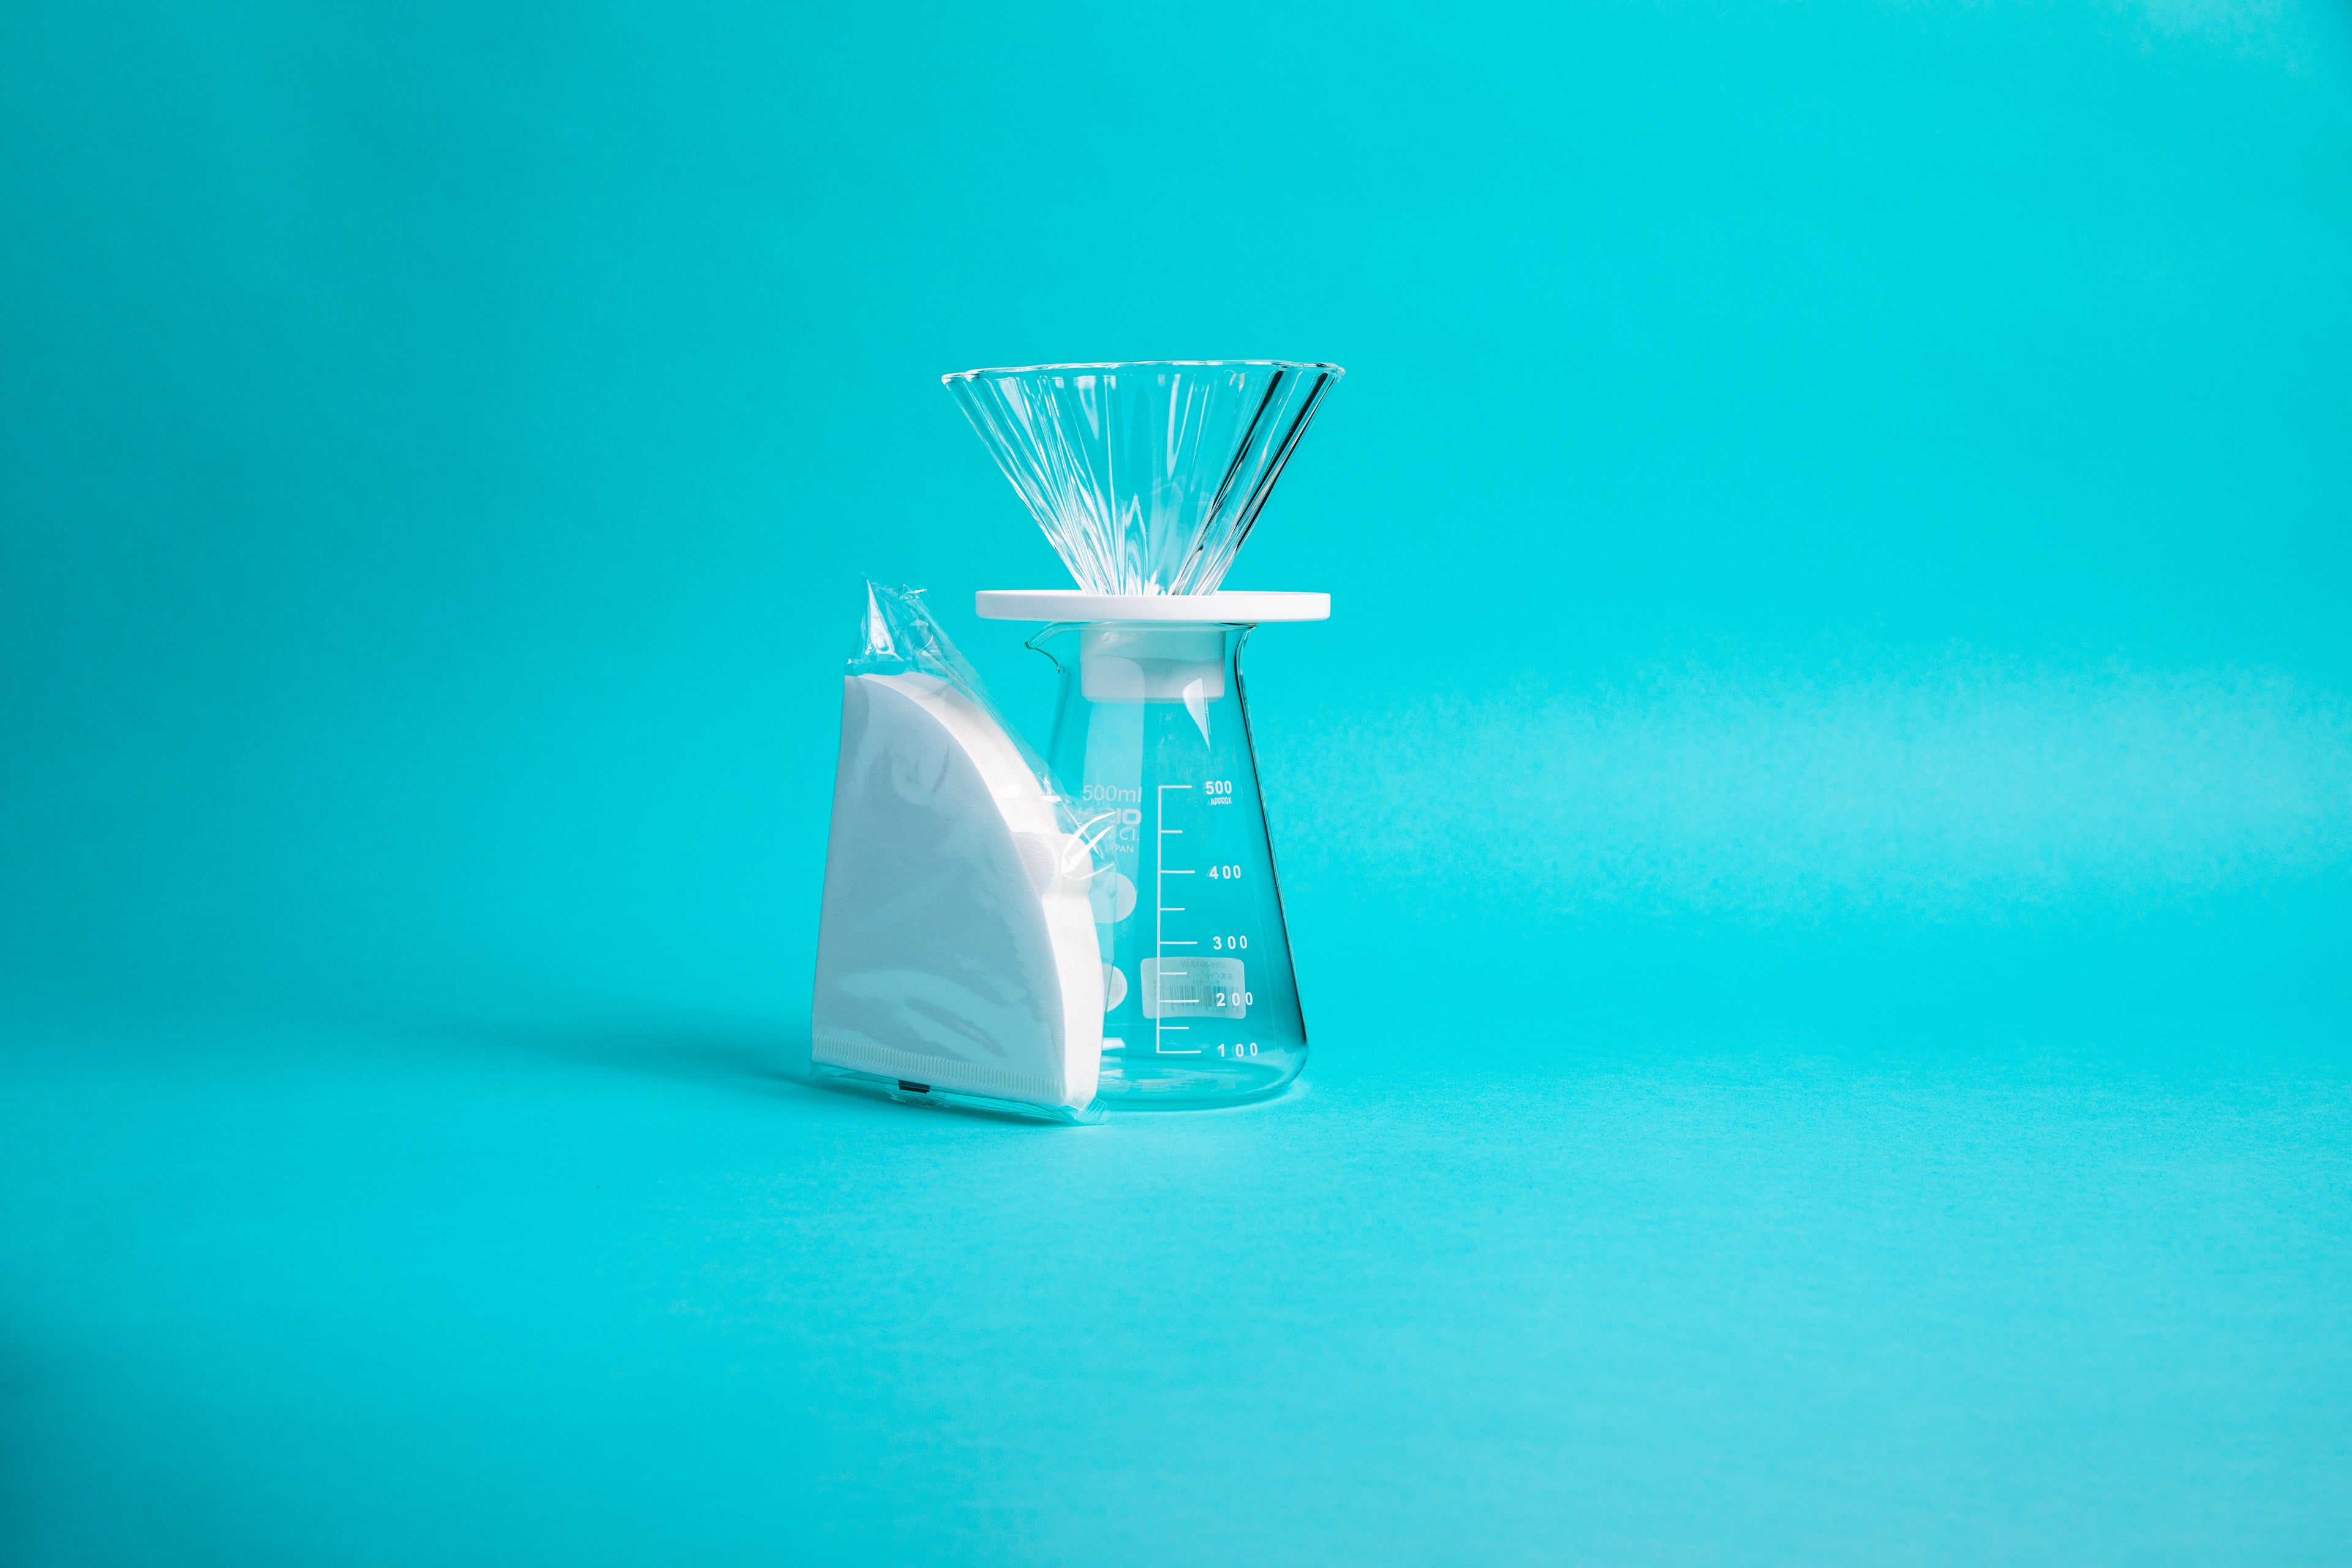 Fluted, flower-shaped glass cone with white plastic holder seated atop a tapered glass beaker with white millileter measurement marks and fluted spout, next to a pack of white cone-shaped filters in a clear plastic wrapper, and set against a blue background.